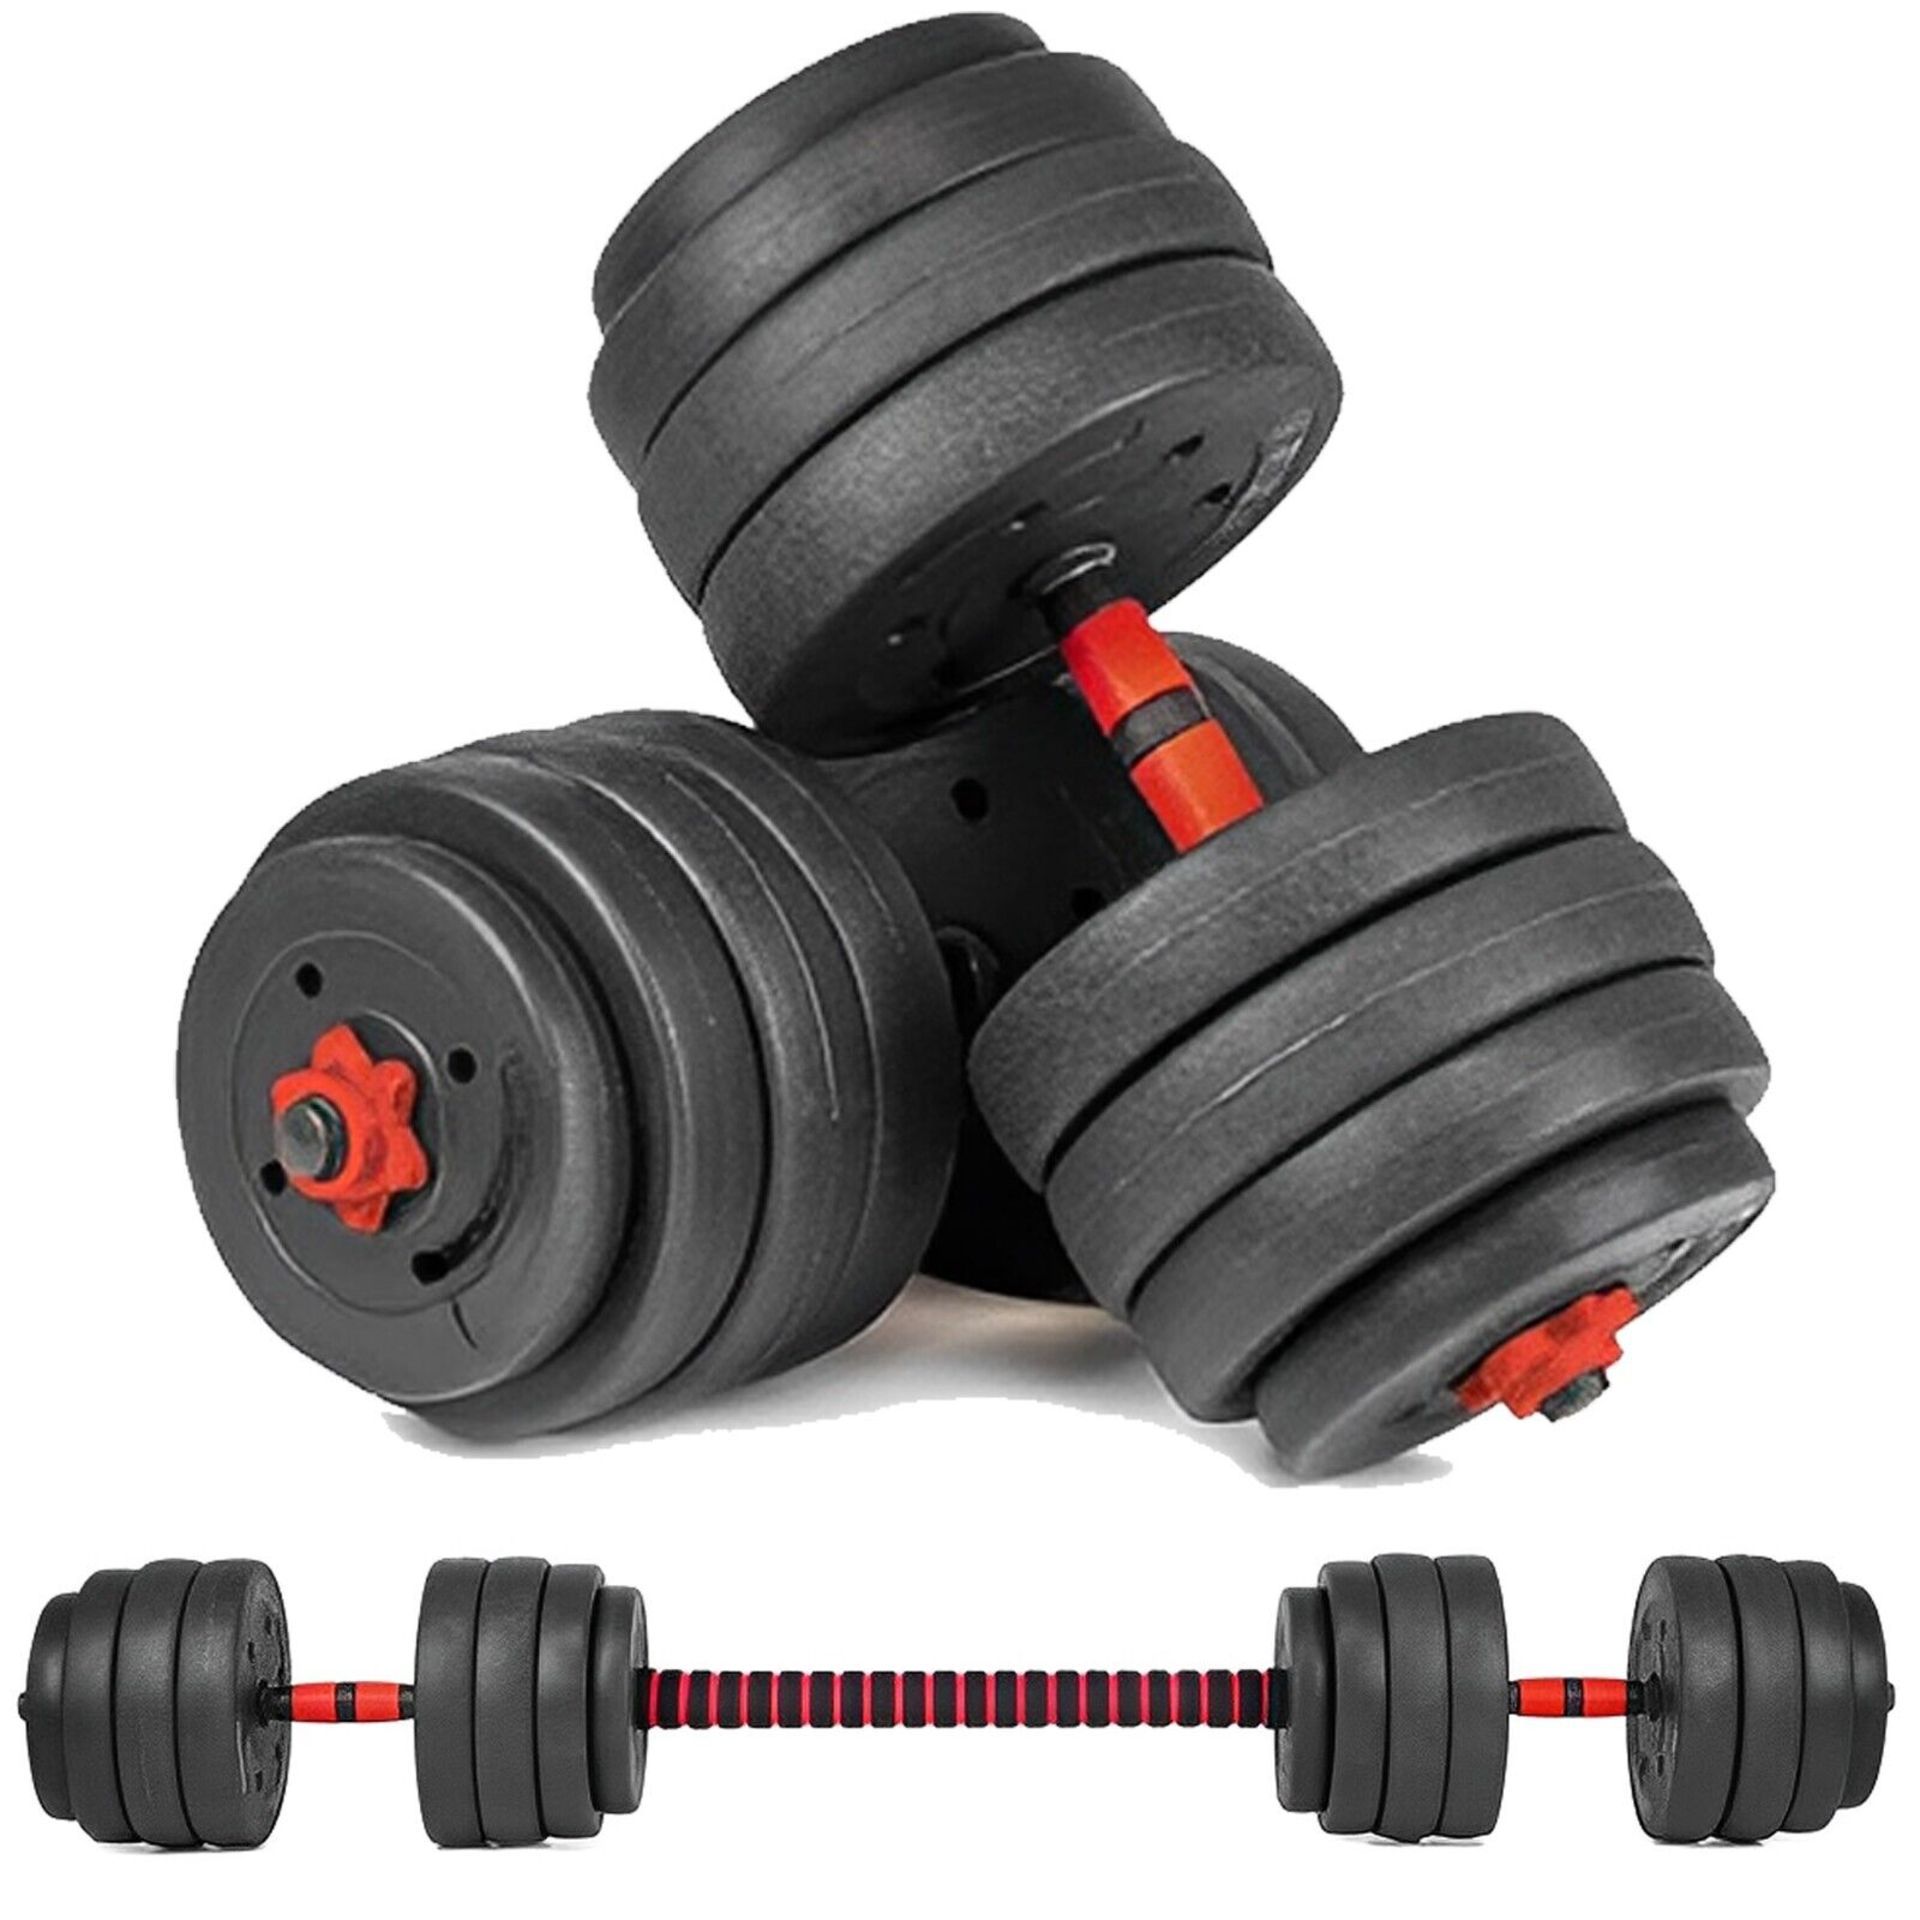 PALLET TO CONTAIN 18 X SETS OF 40kg Dumbbell Barbell Bar Weight Set. (PALLET ID: 19) Adjustable - Image 2 of 4